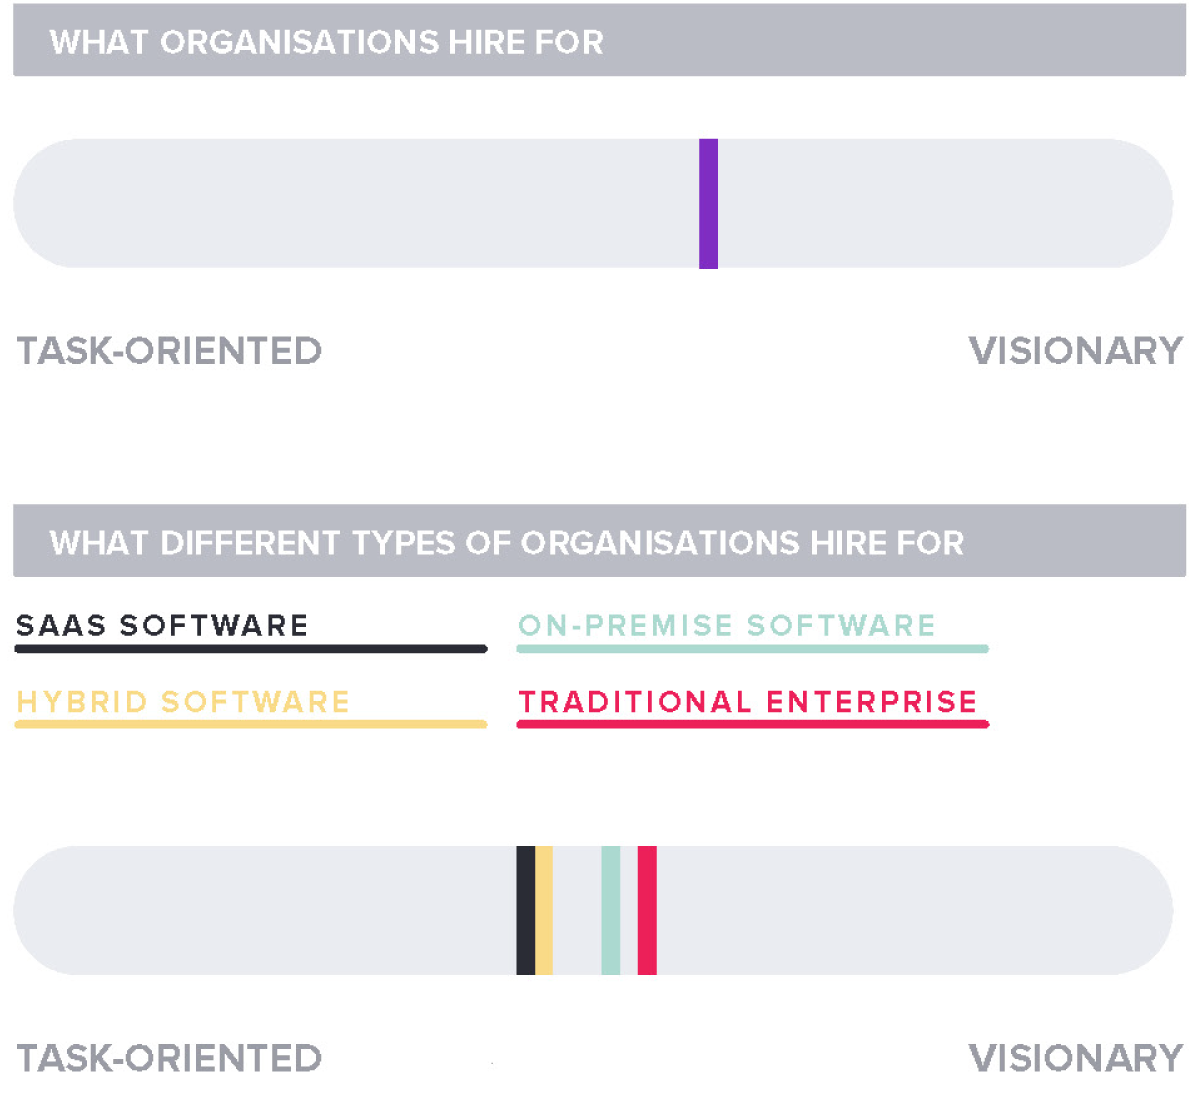 What organisations hire for / What different types of organisations hire for